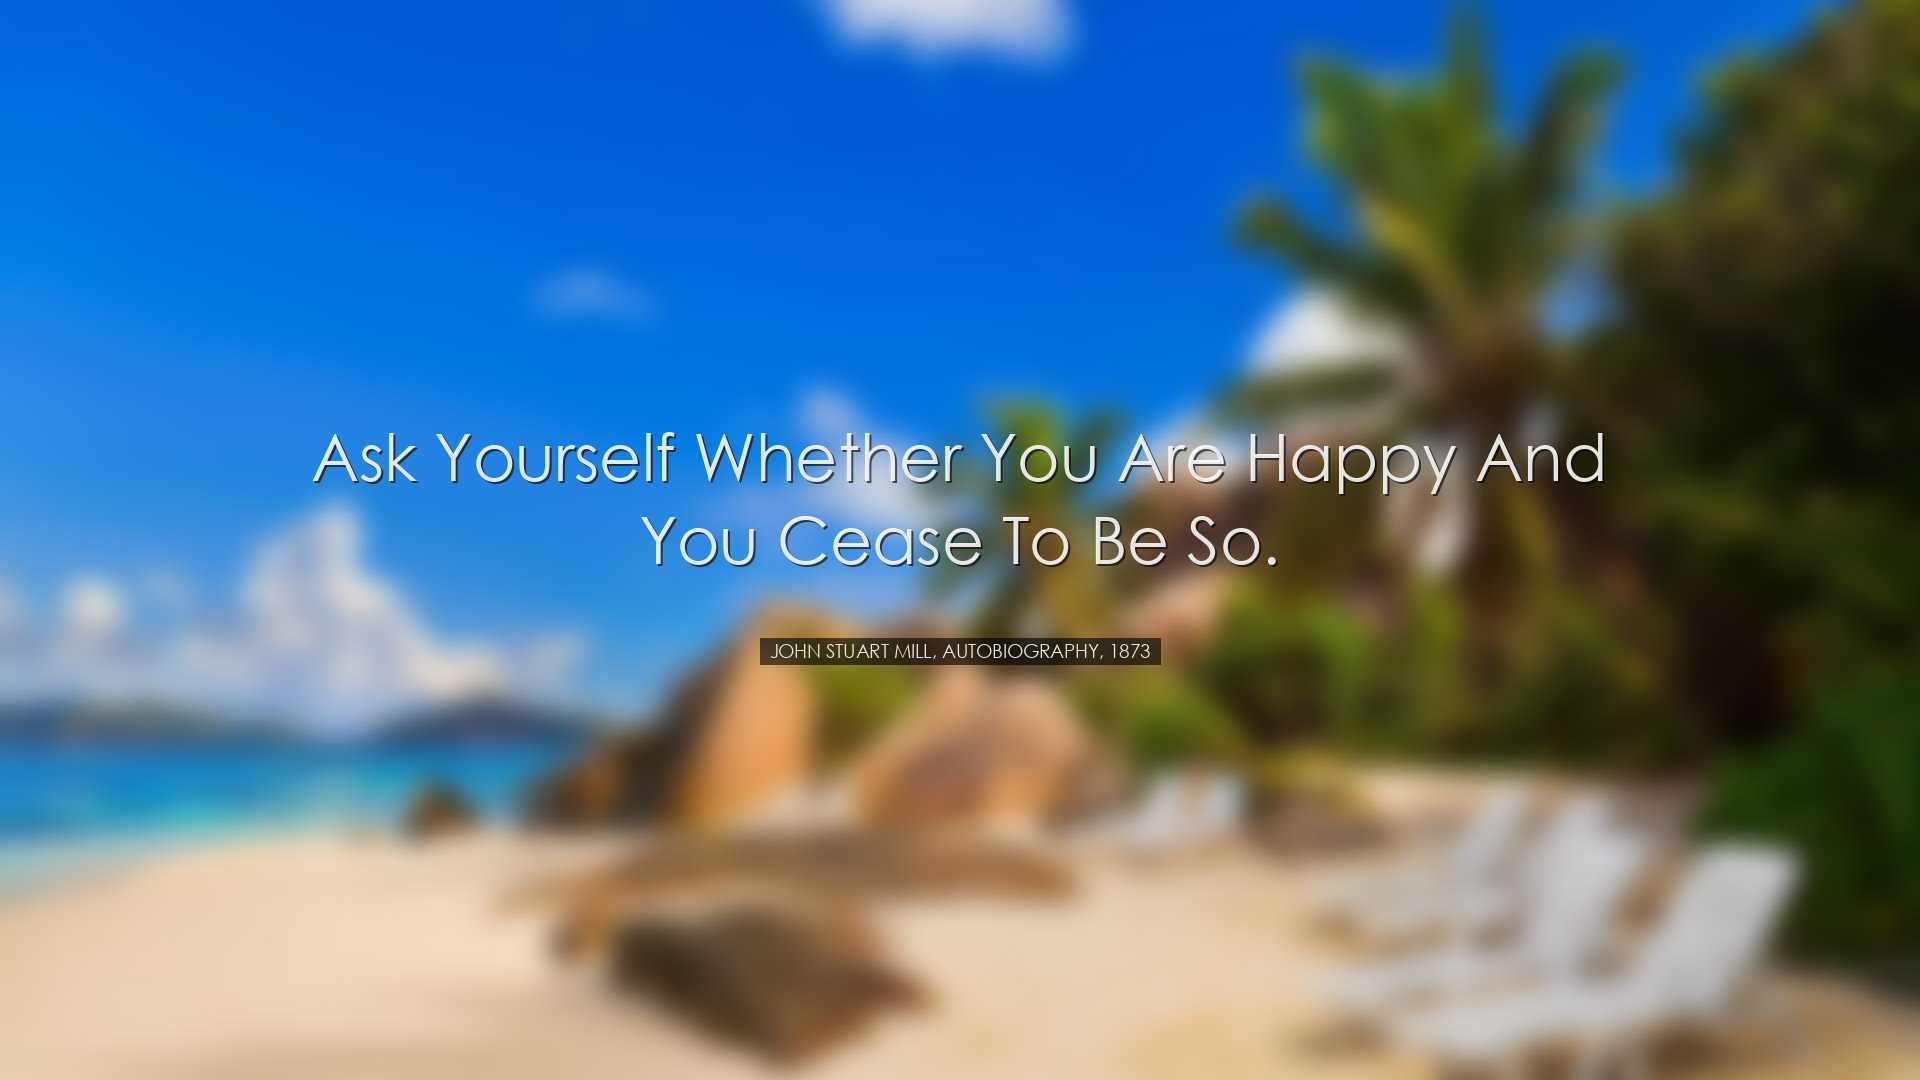 Ask yourself whether you are happy and you cease to be so. - John